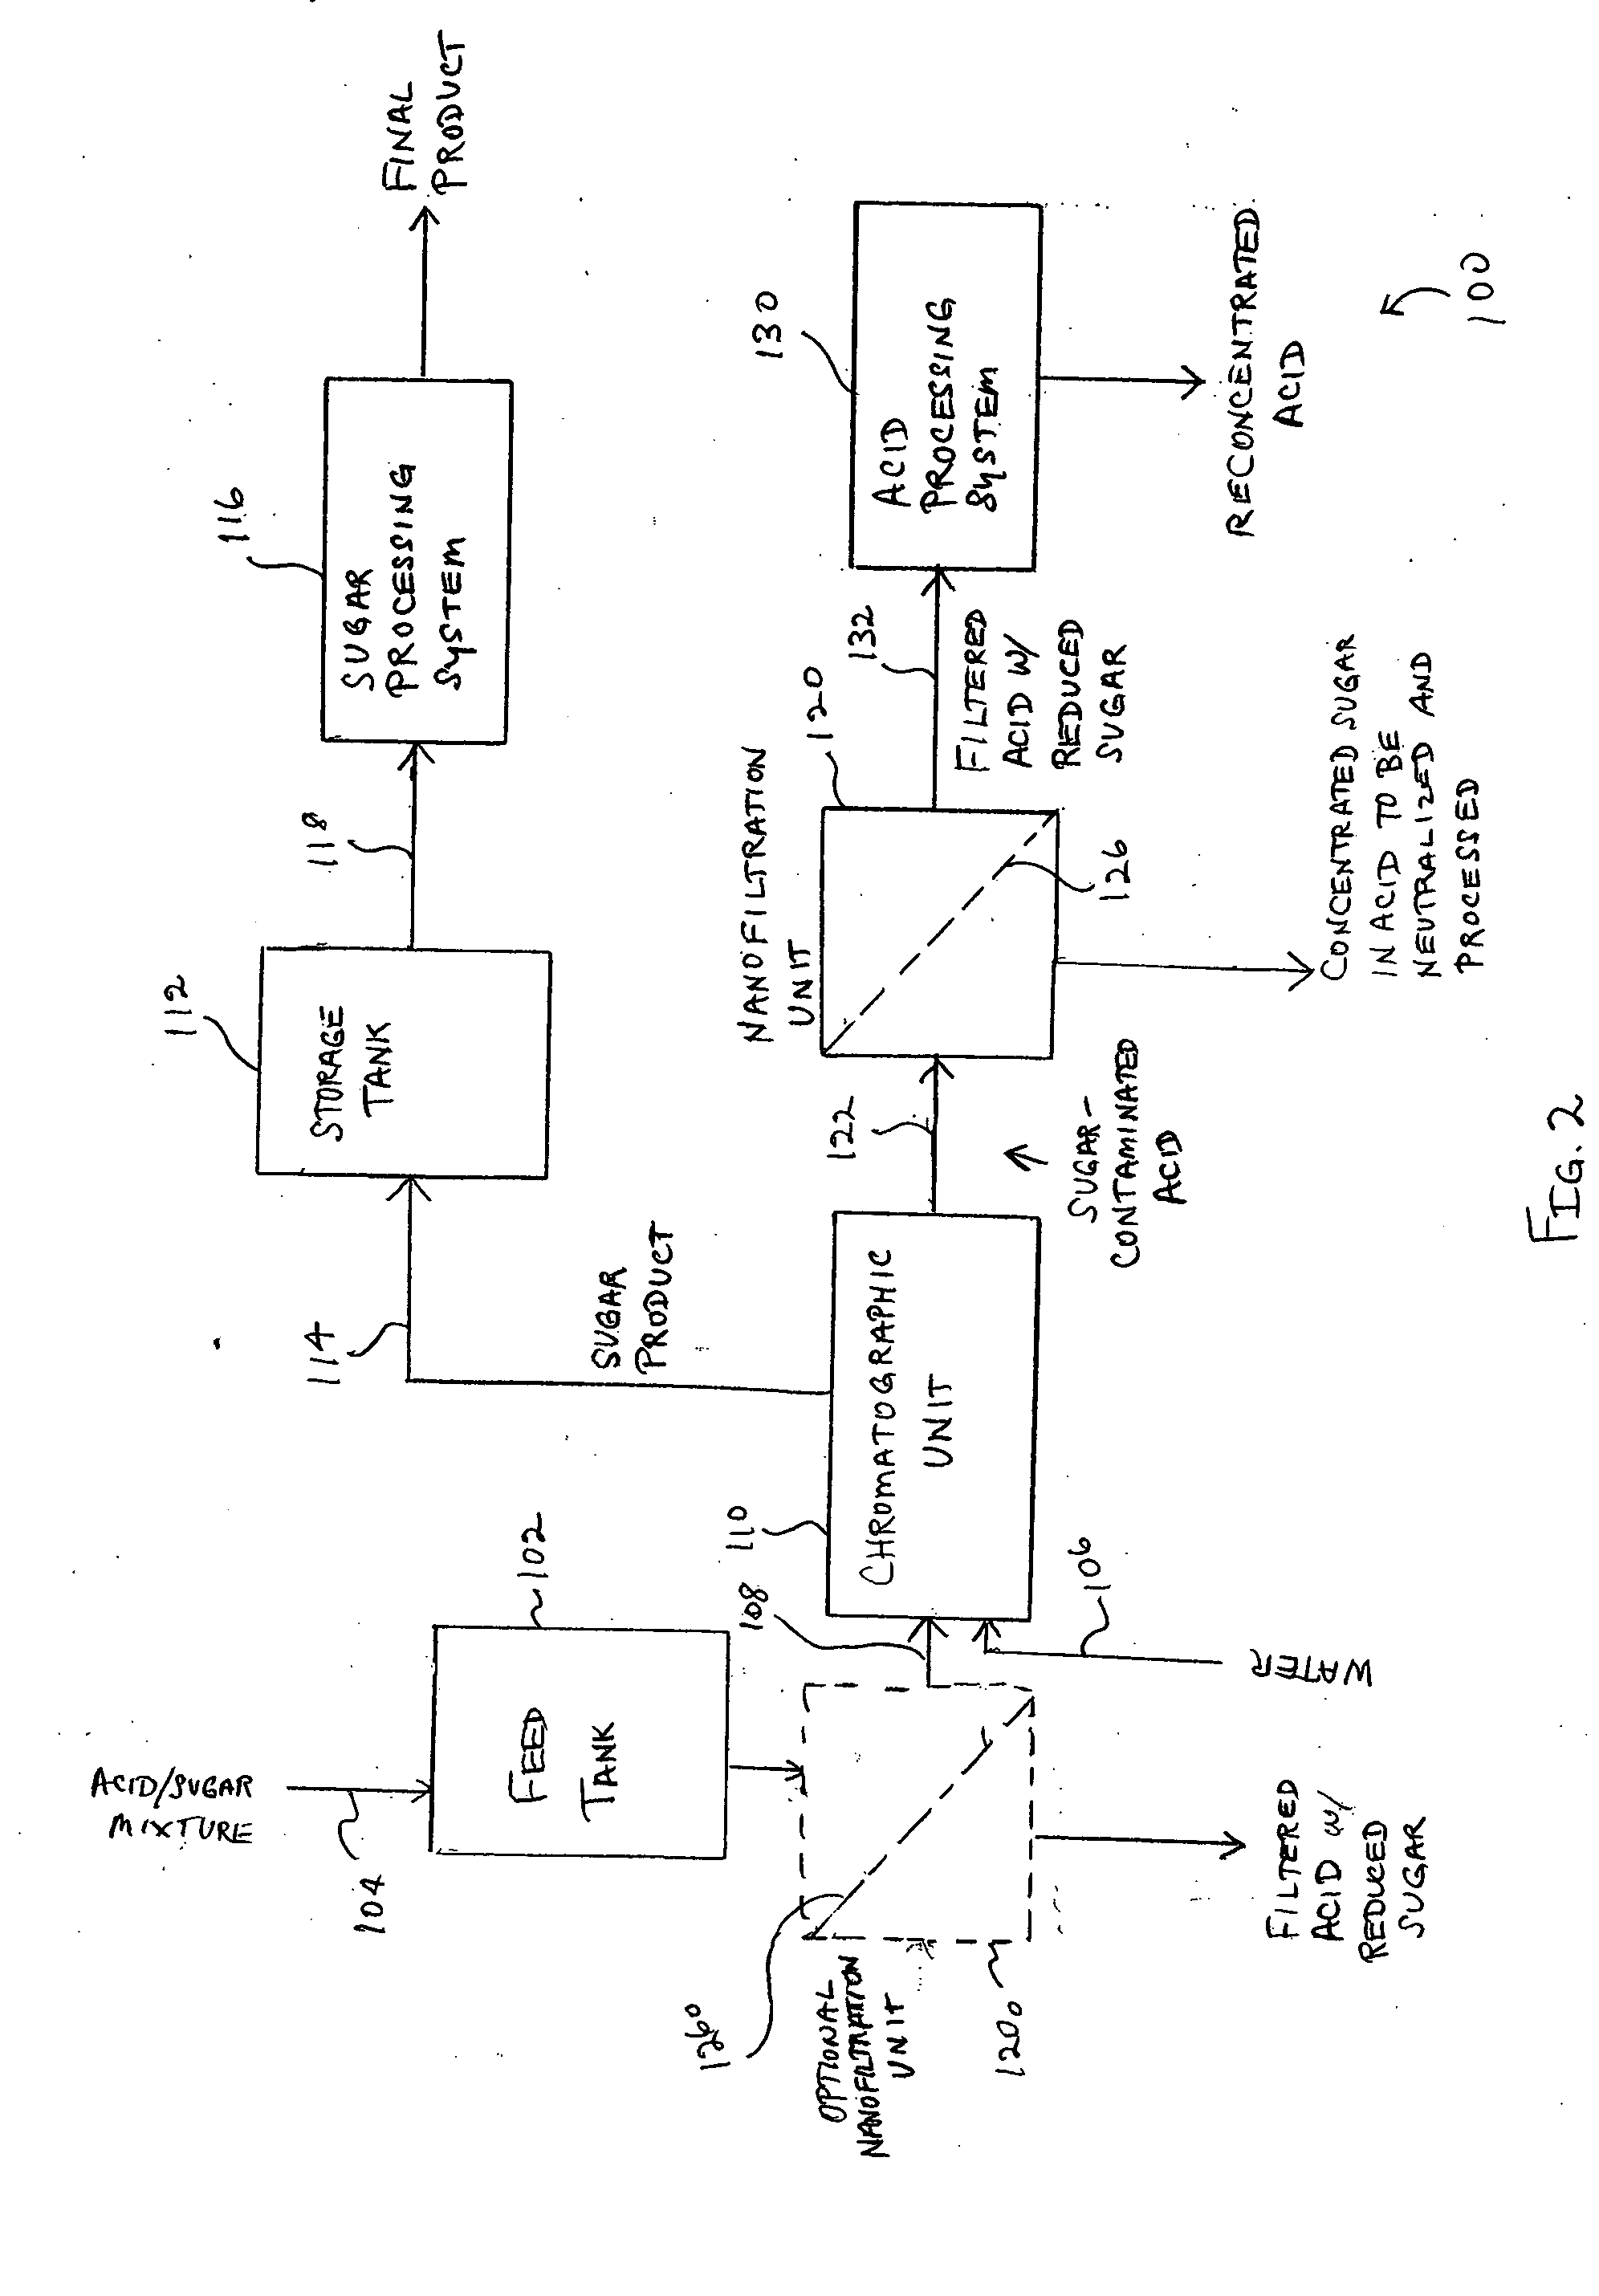 Nanofilter system and method of use